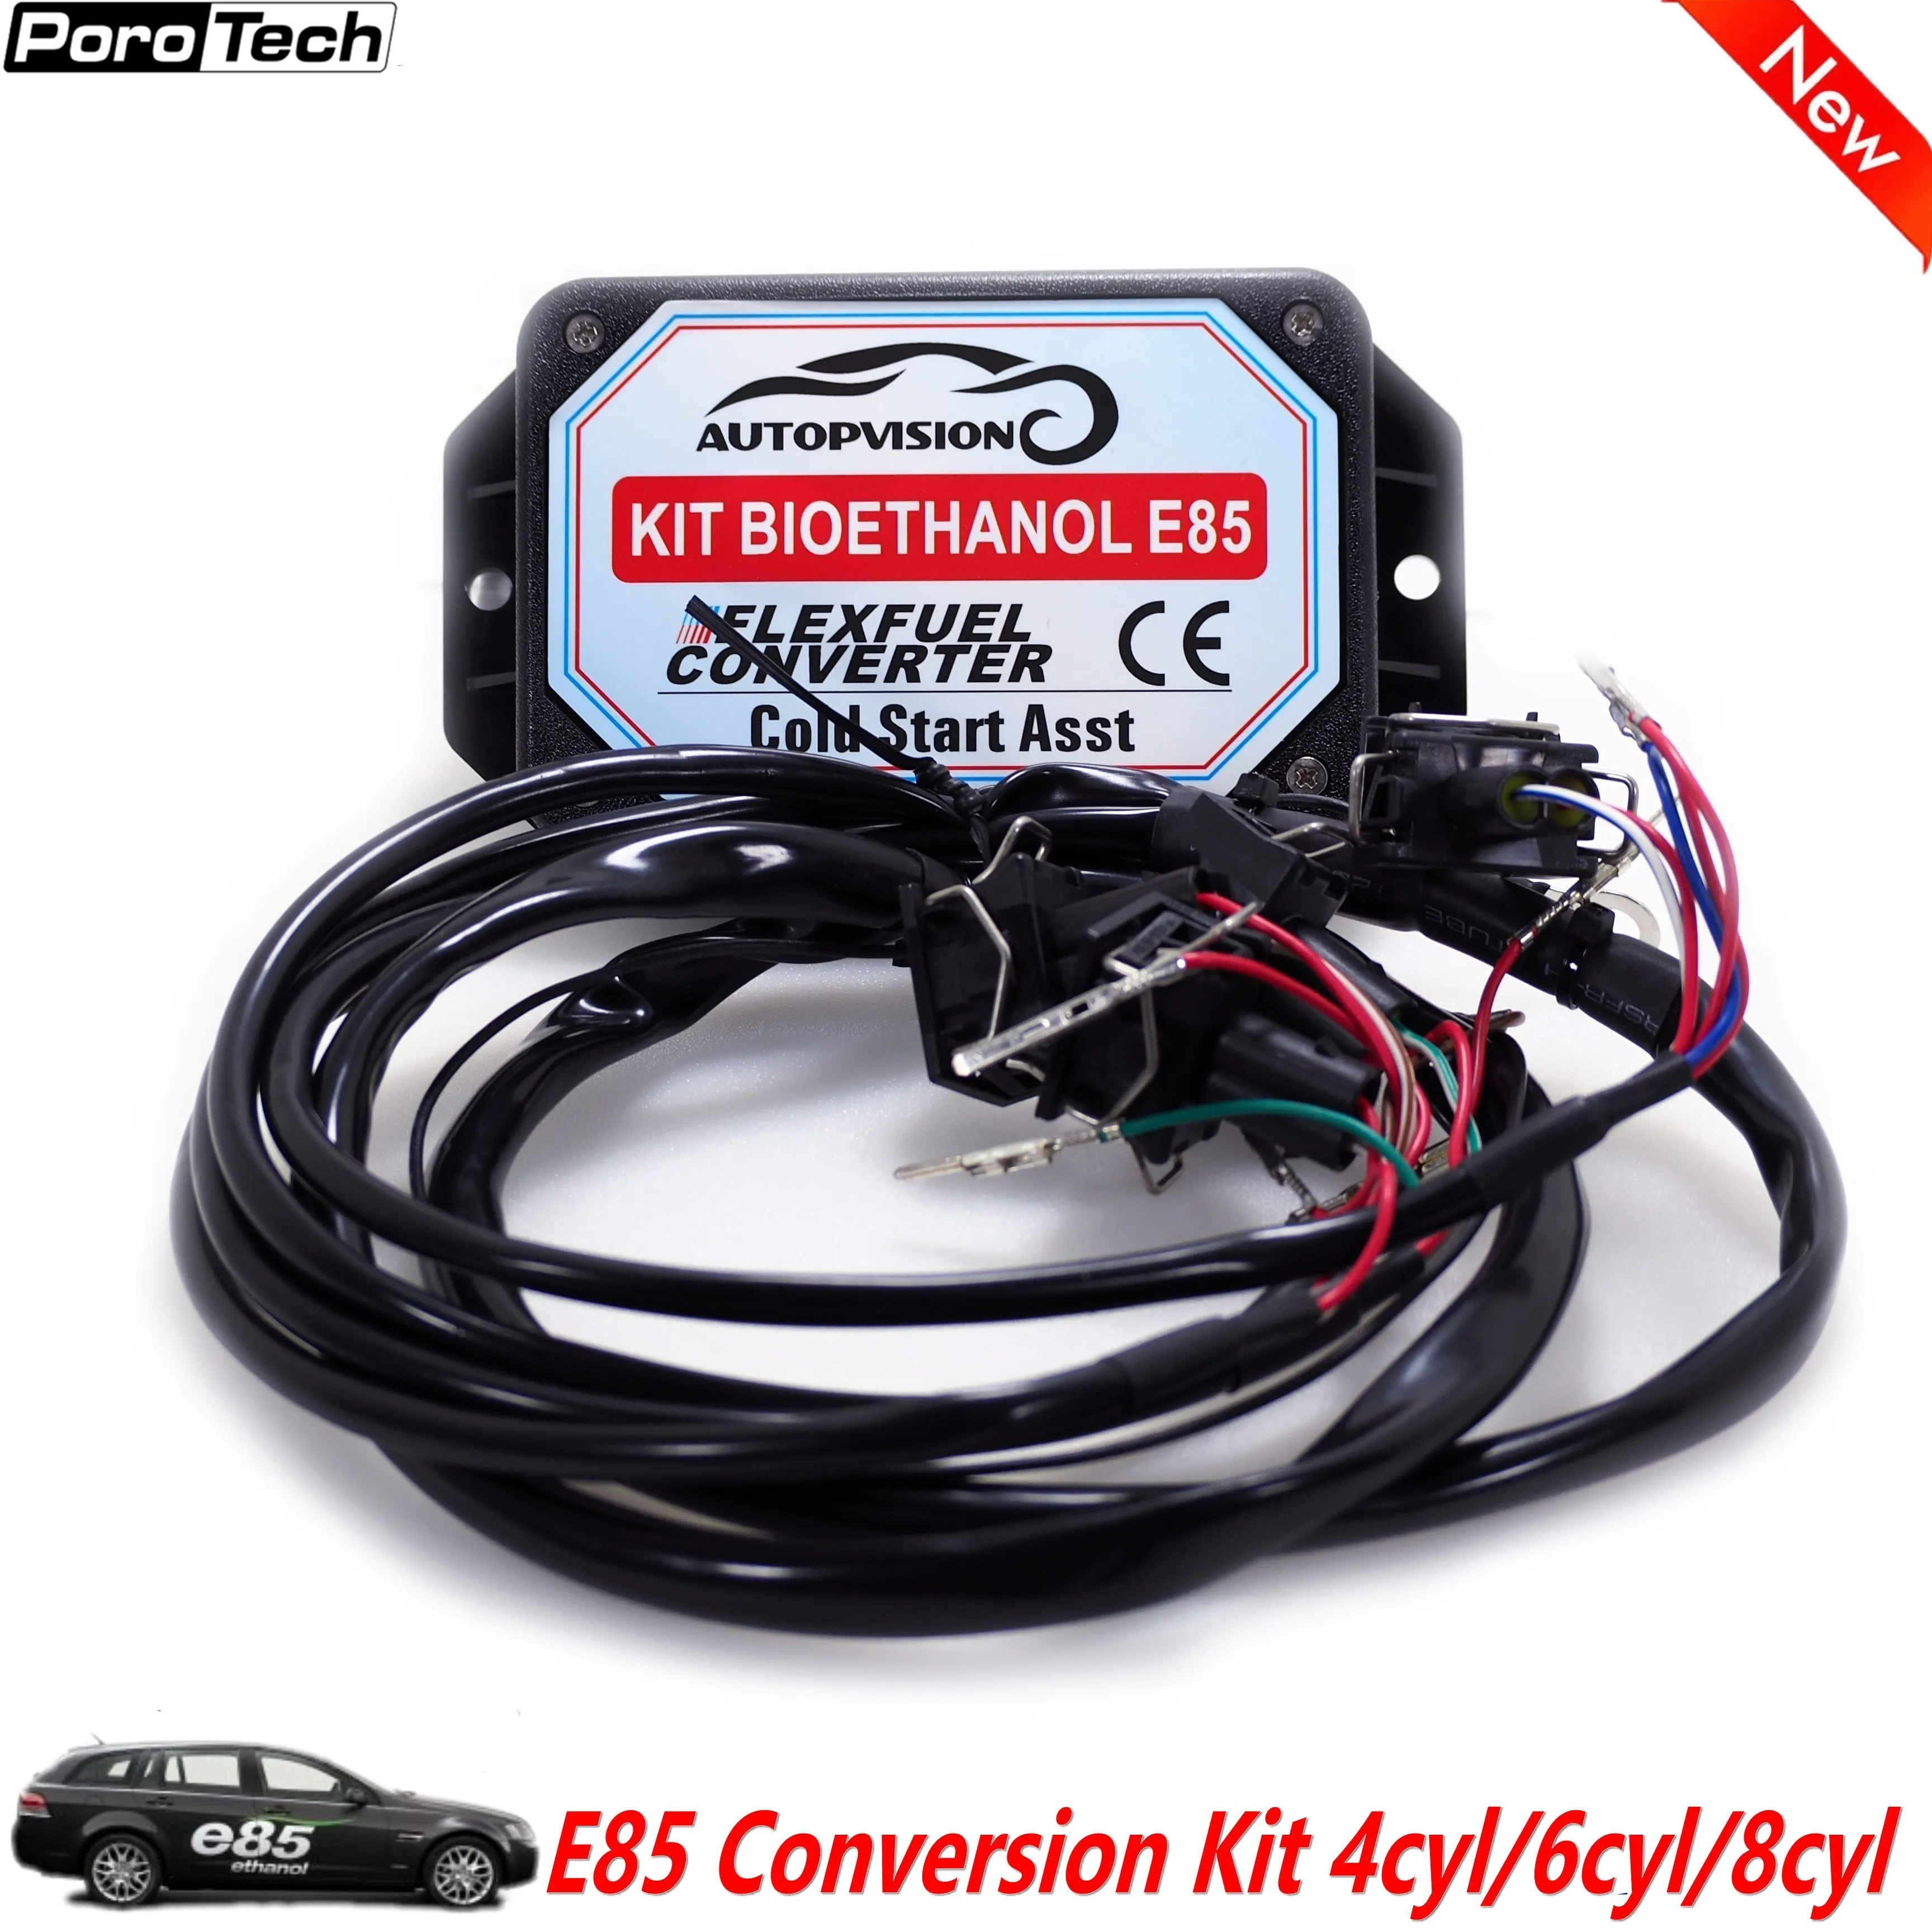 NEW cool start E85 4/6/8CYL Conversion kit Flex Fuel ethanol Car| work with car original fuel injection system adjust air/fuel